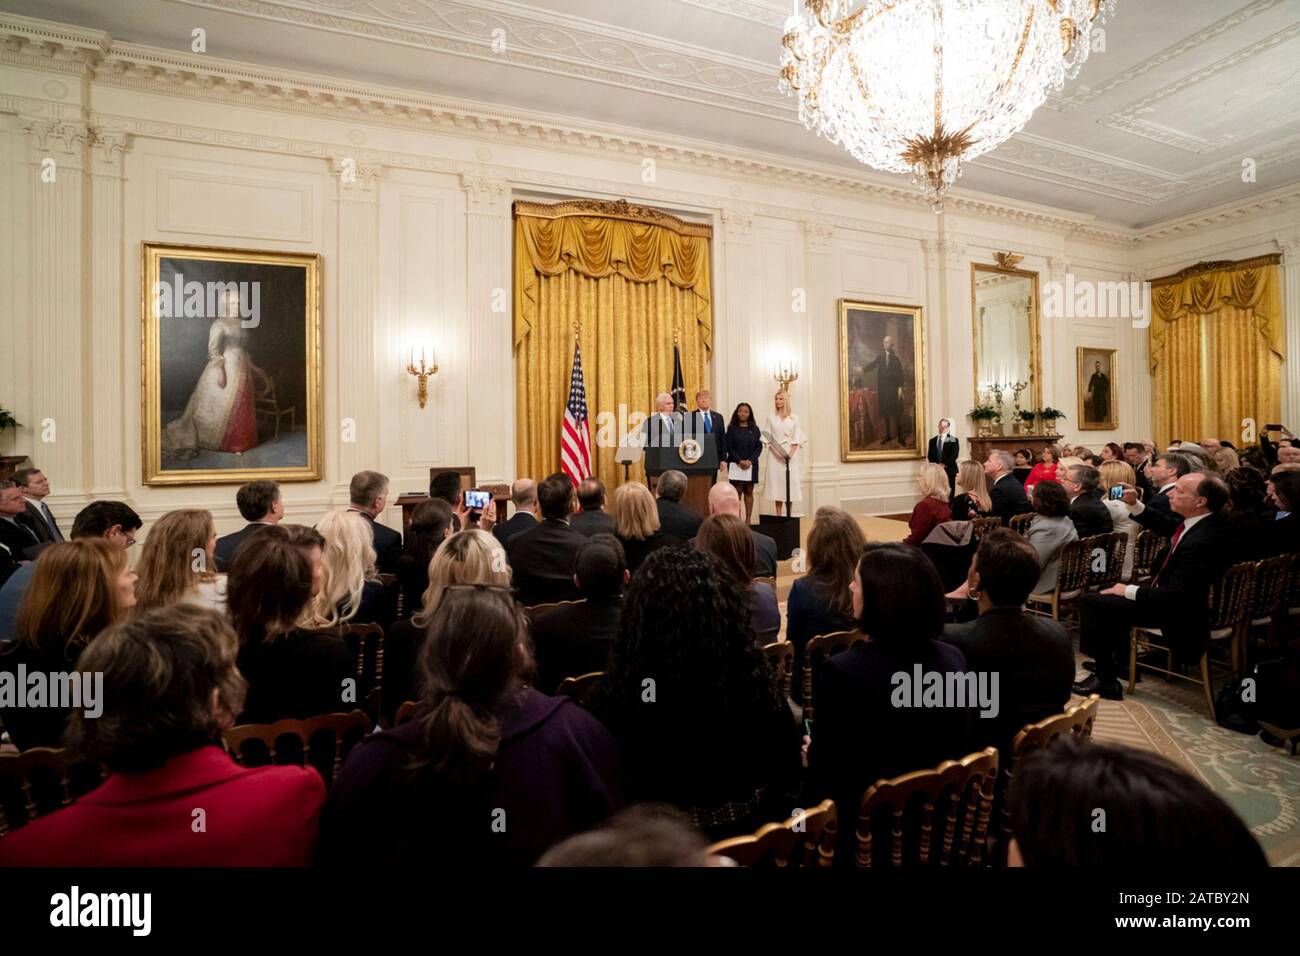 Washington, United States Of America. 31st Jan, 2020. Washington, United States of America. 31 January, 2020. U.S Vice President Mike Pence delivers remarks during a signing ceremony on Human Trafficking in the East Room of the White House January 31, 2020 in Washington, DC. The event took place following the White House Summit on Human Trafficking in honor of the 20th Anniversary of the Trafficking Victims Protection Act. Credit: Andrea Hanks/White House Photo/Alamy Live News Stock Photo